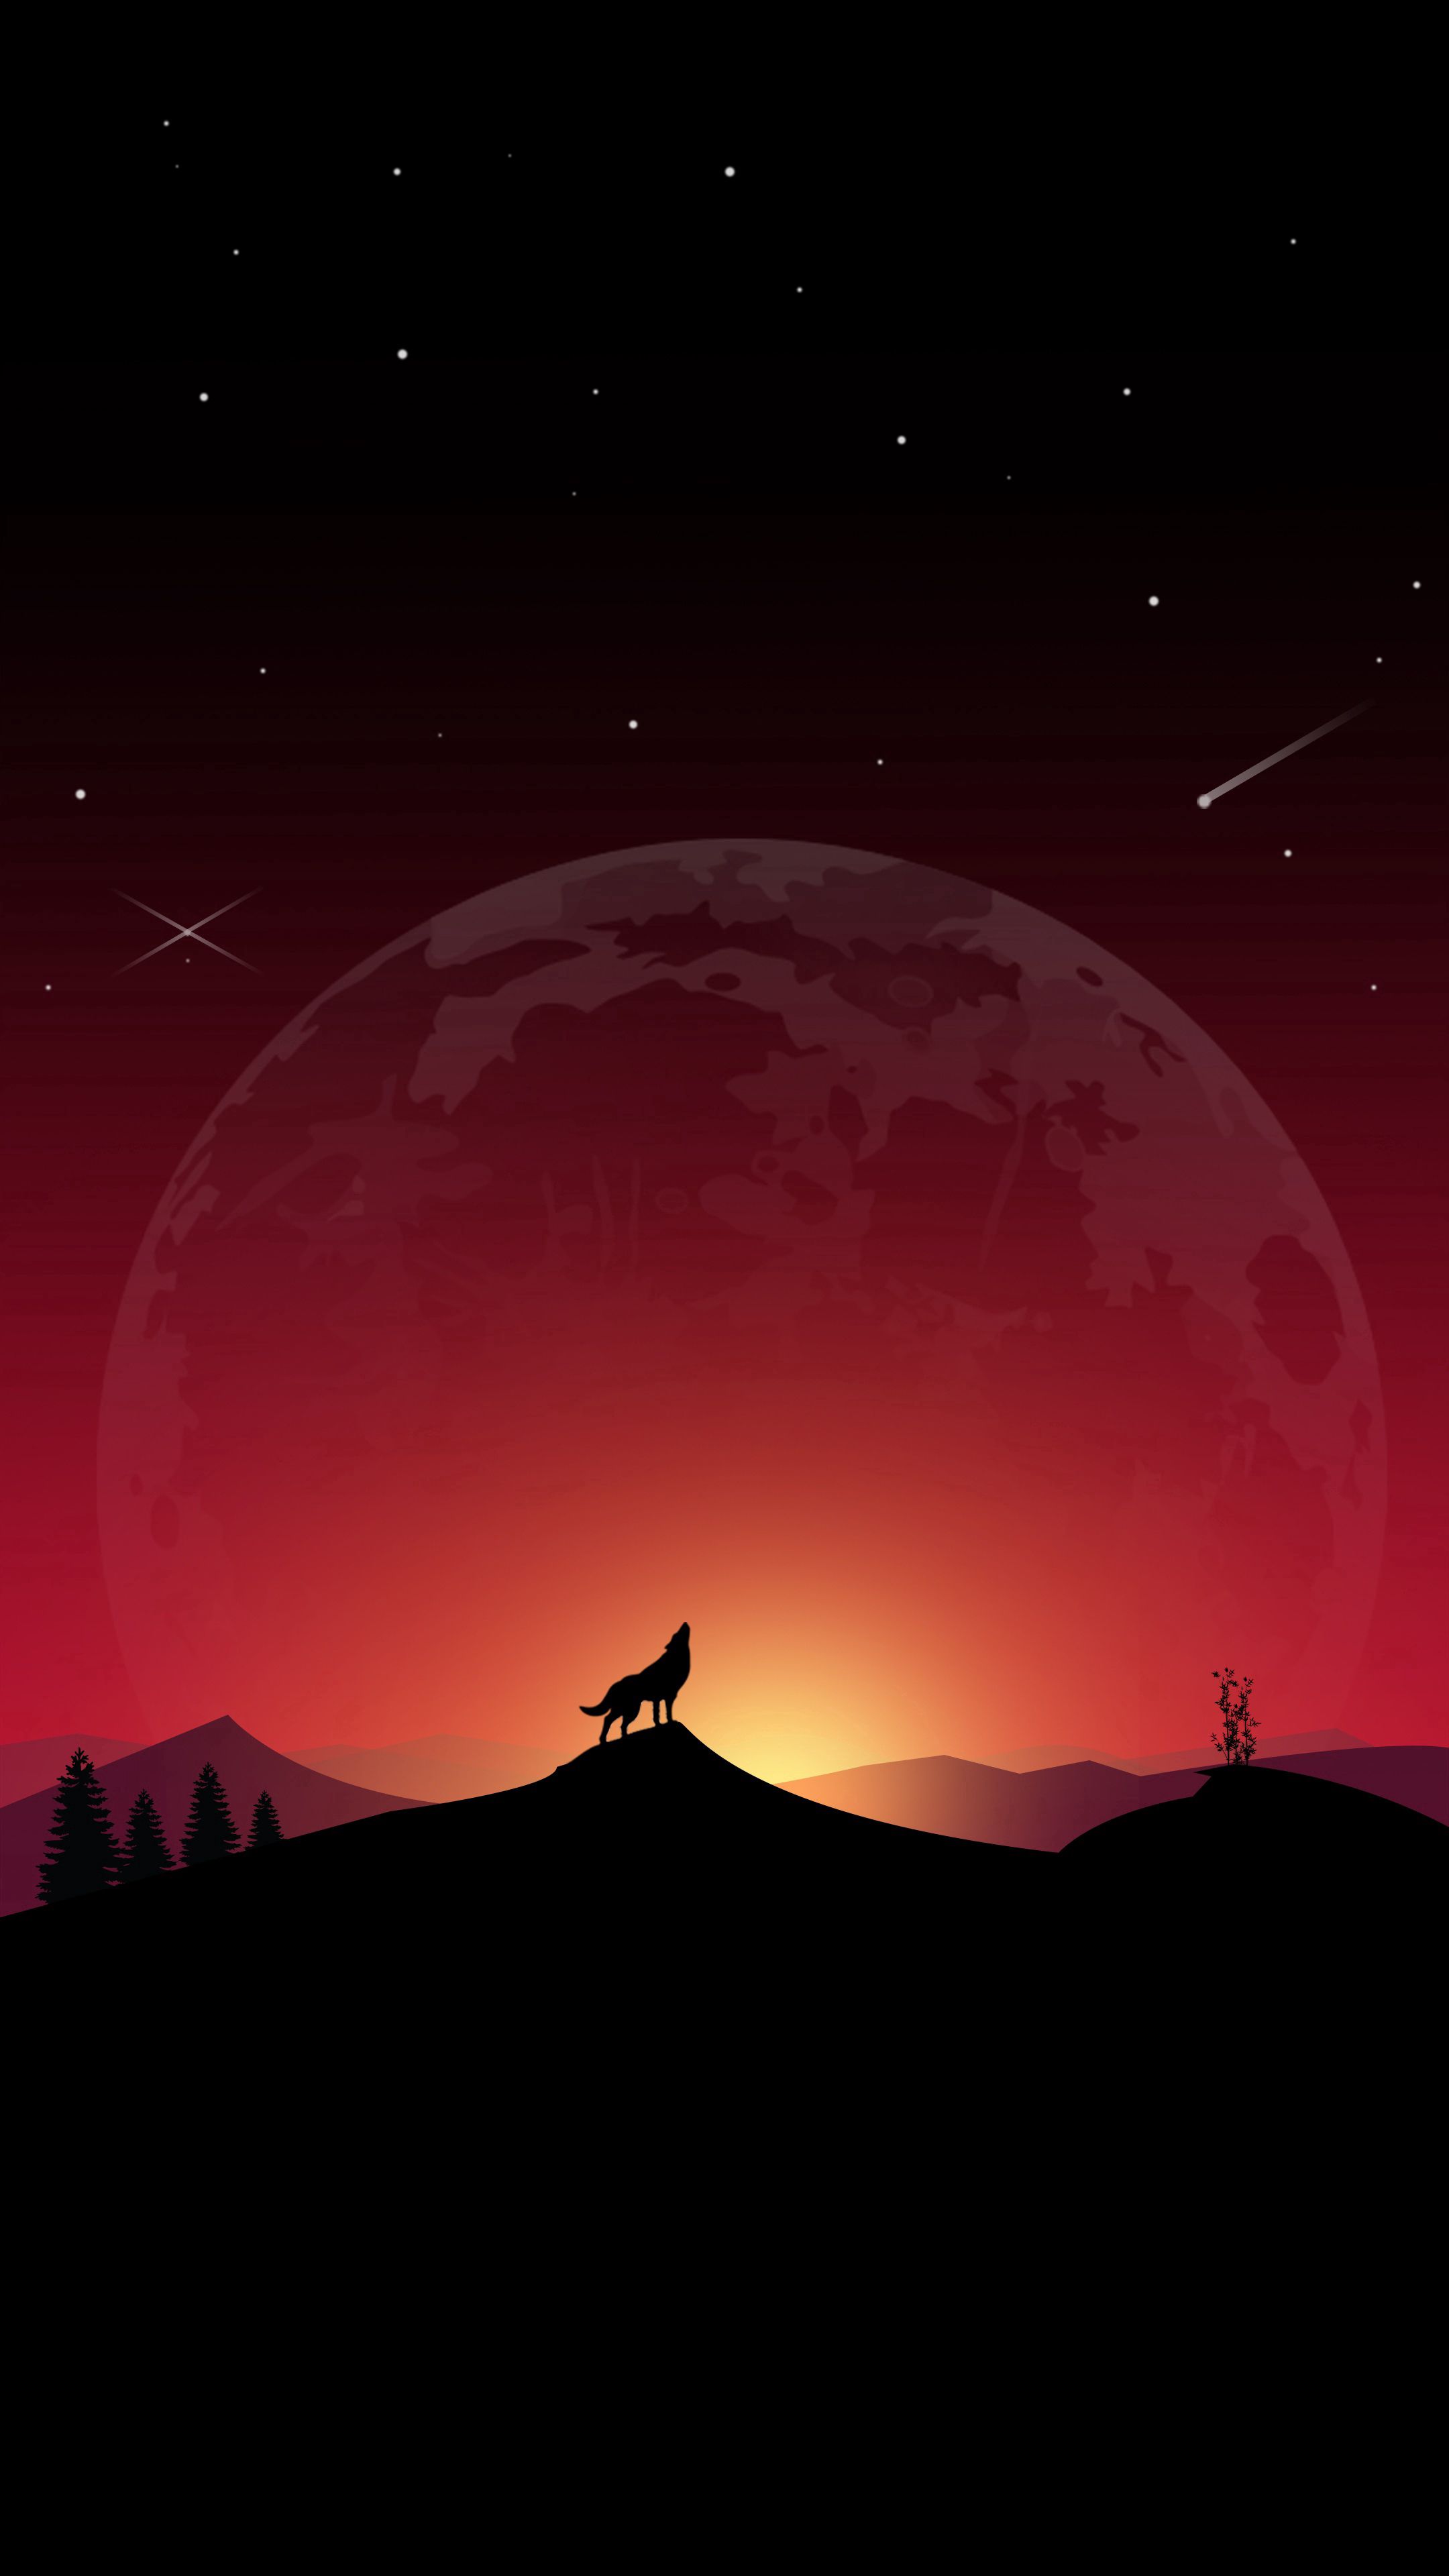 wallpapers wolf, vector, full moon, art, howl, loneliness